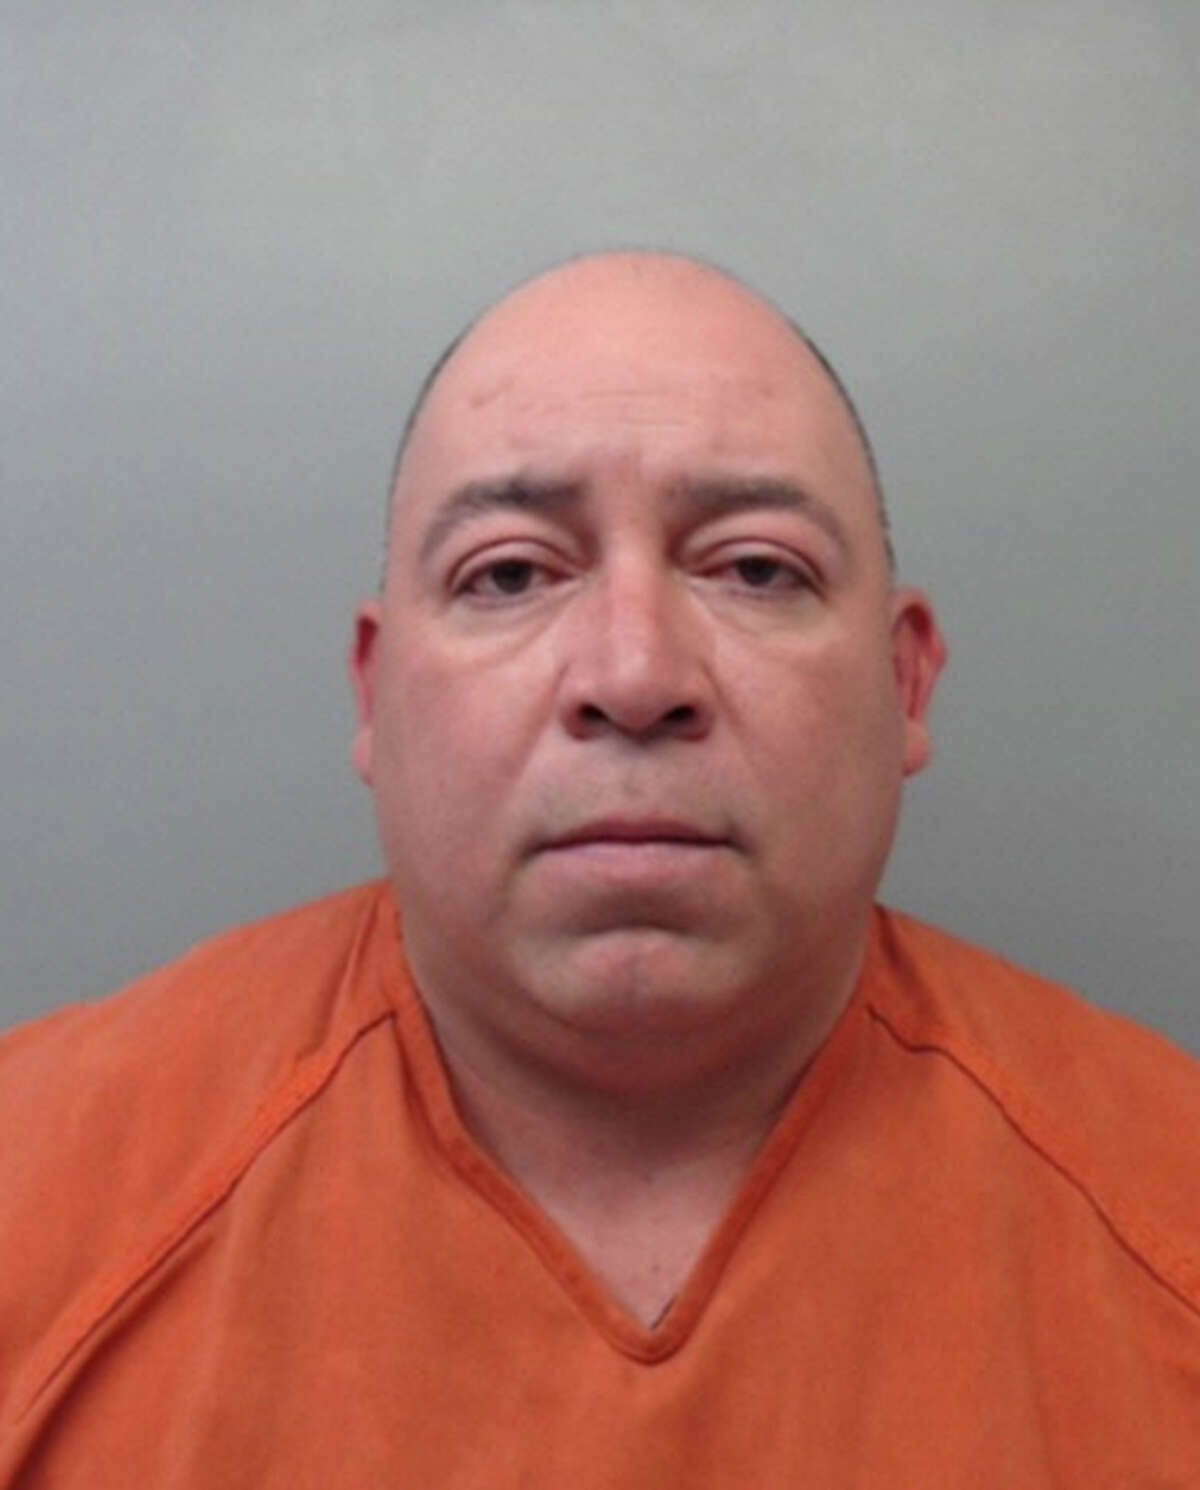 Jose Manuel Rodriguez, 47, was charged with gambling promotion.